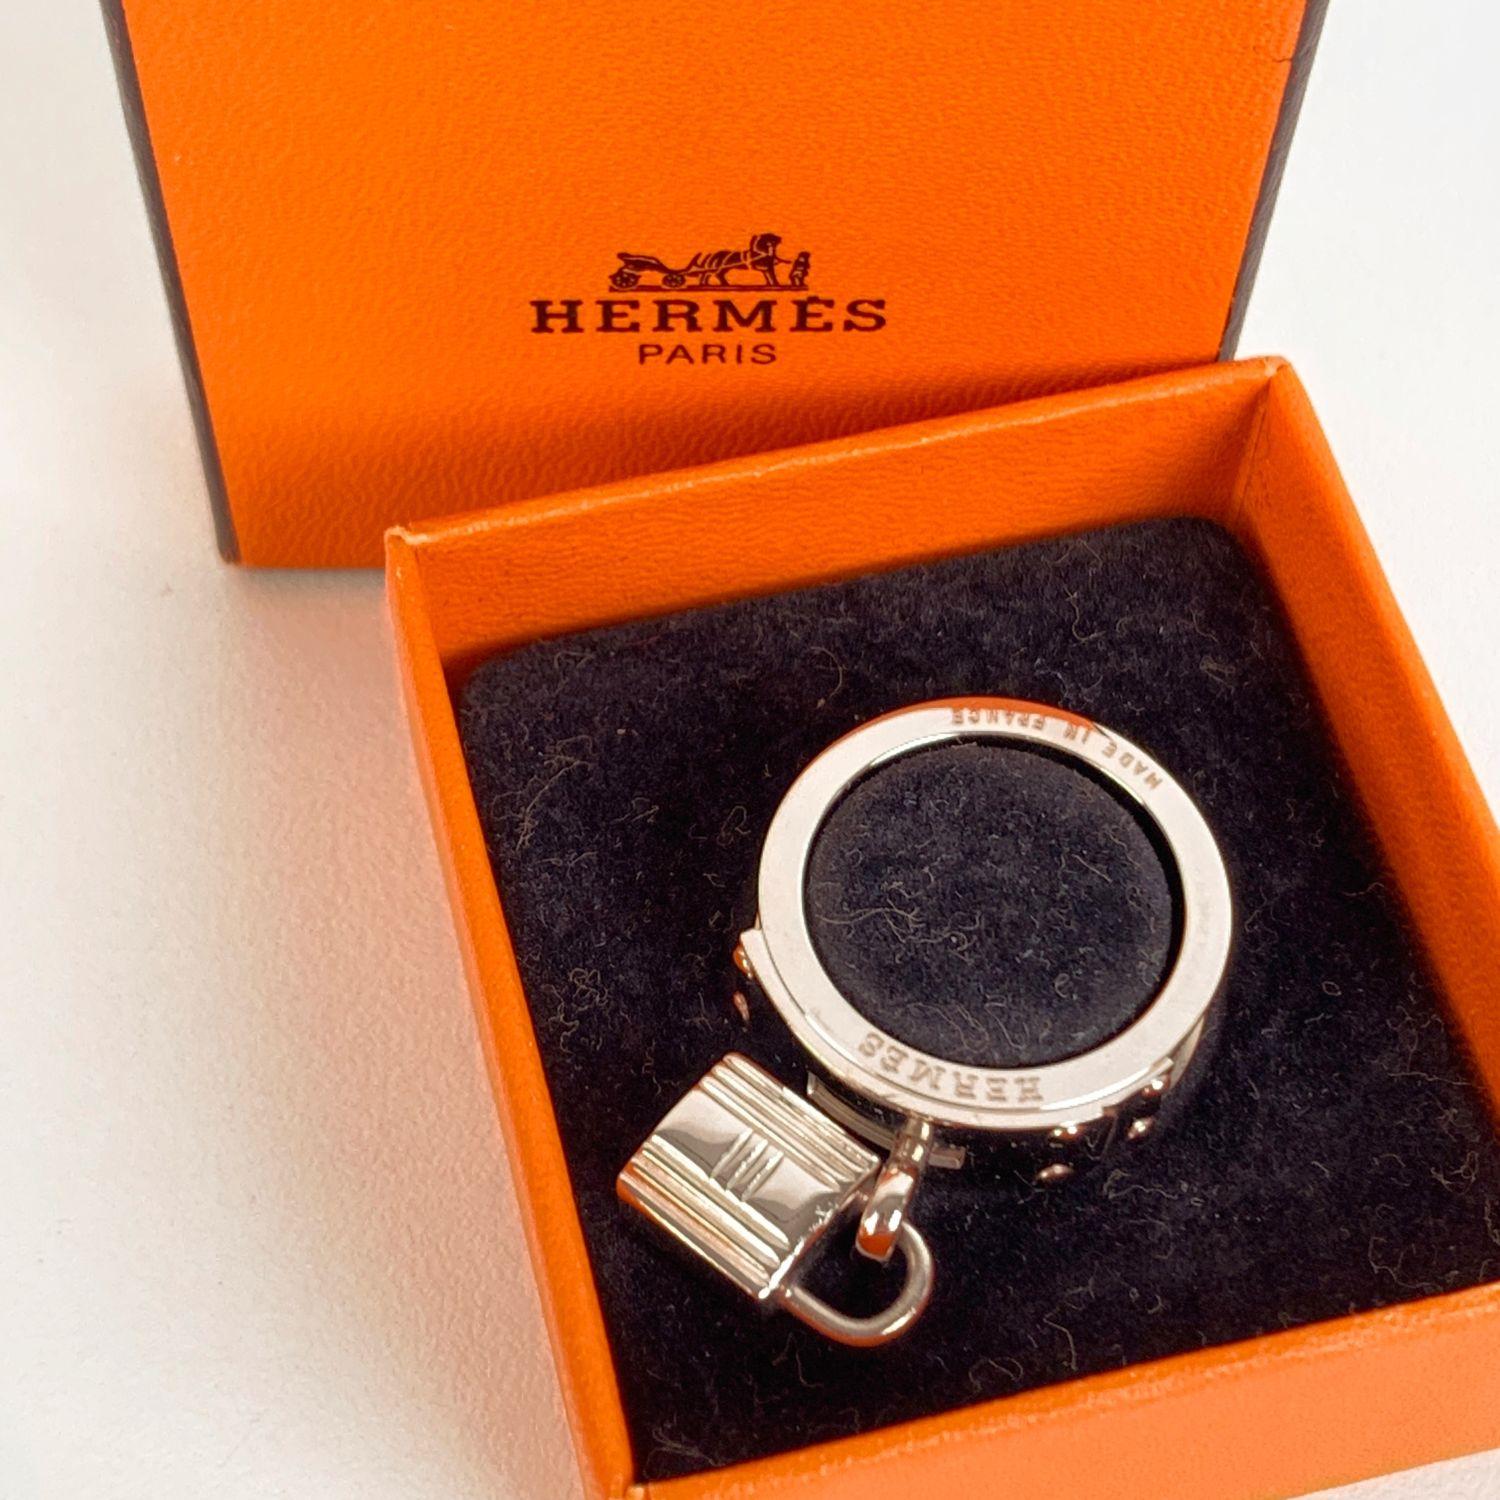 HERMES silver metal Palladium Swift Kelly Lock scarf ring with black leather insert. It features the iconic signature Kelly closure with its palladium padlock dangling on the front. Diameter of the ring: 1 inch - 2,5 cm. Engraved 'Hermes' and 'Made